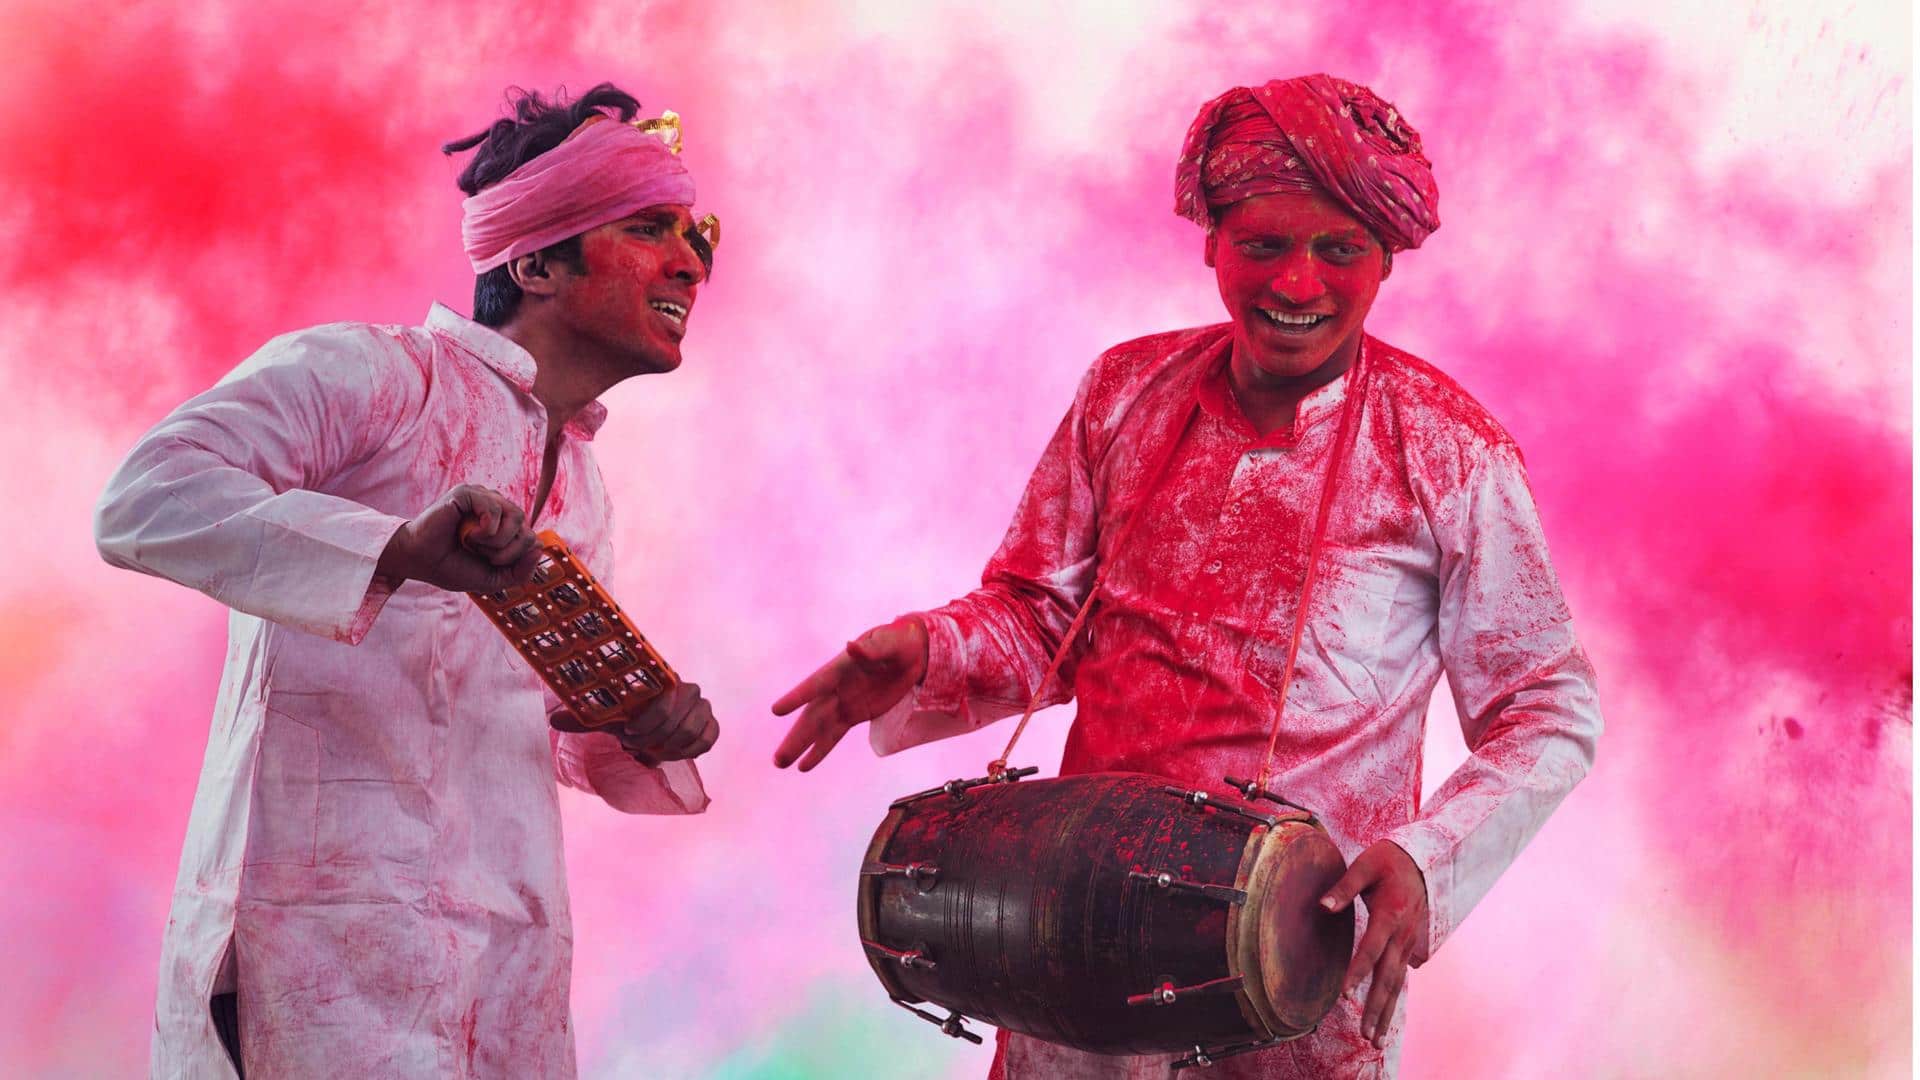 Here are some dapper Holi outfit ideas for men